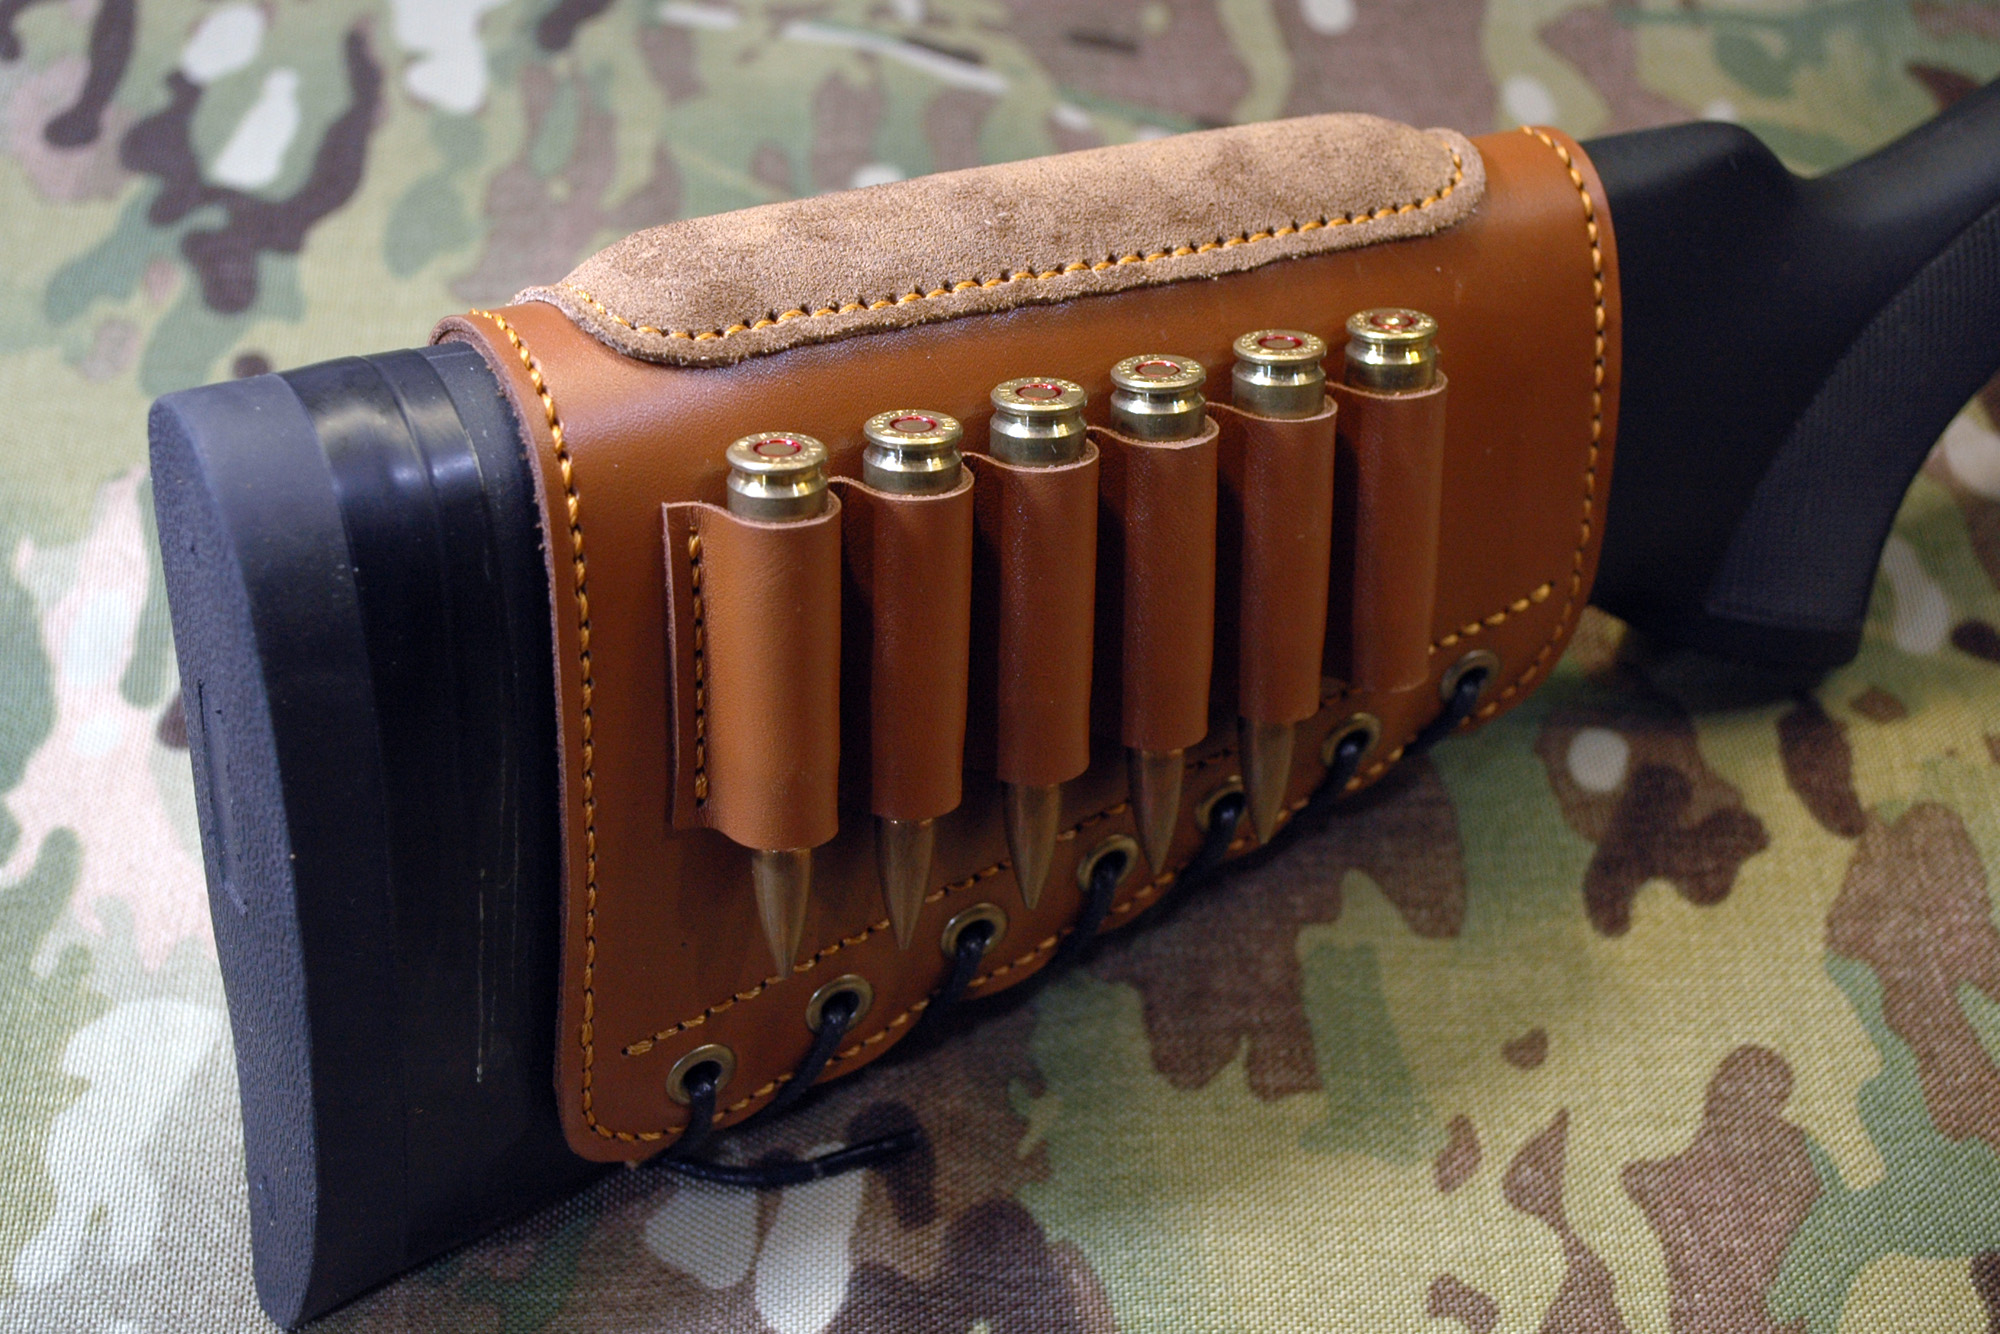 Details about   Premium Leather Rifle Cartridge Holder Ammo Butt stock 6 Pockets.USA Sealer. 